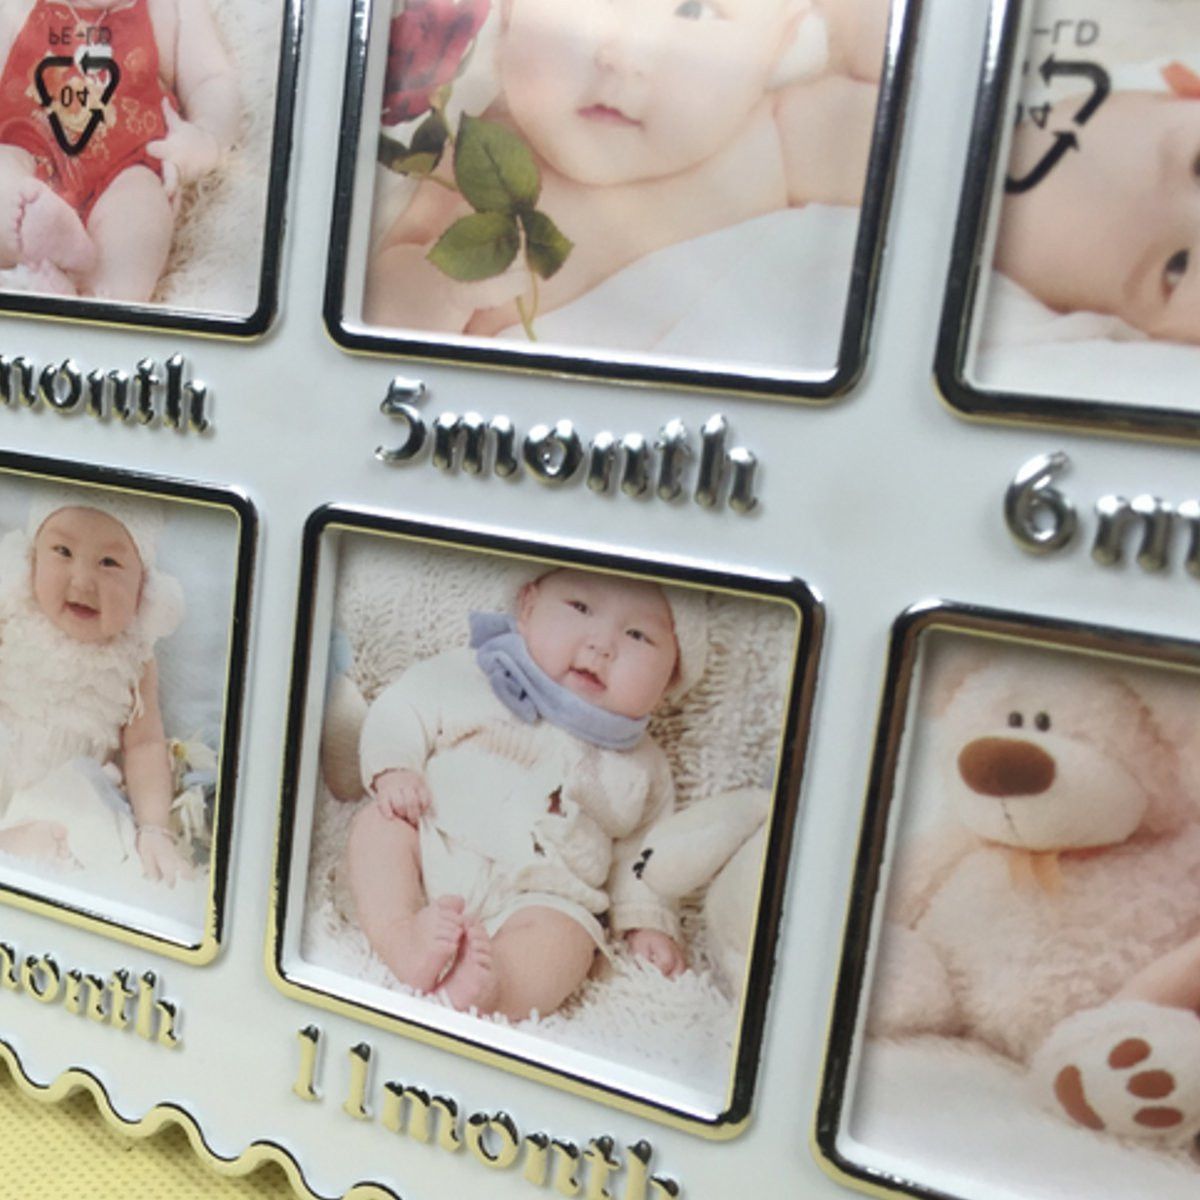 Infants-Baby-One-Year-Picture-Hanging-Decorative-Banquet-Photo-Picture-Frames-1115716